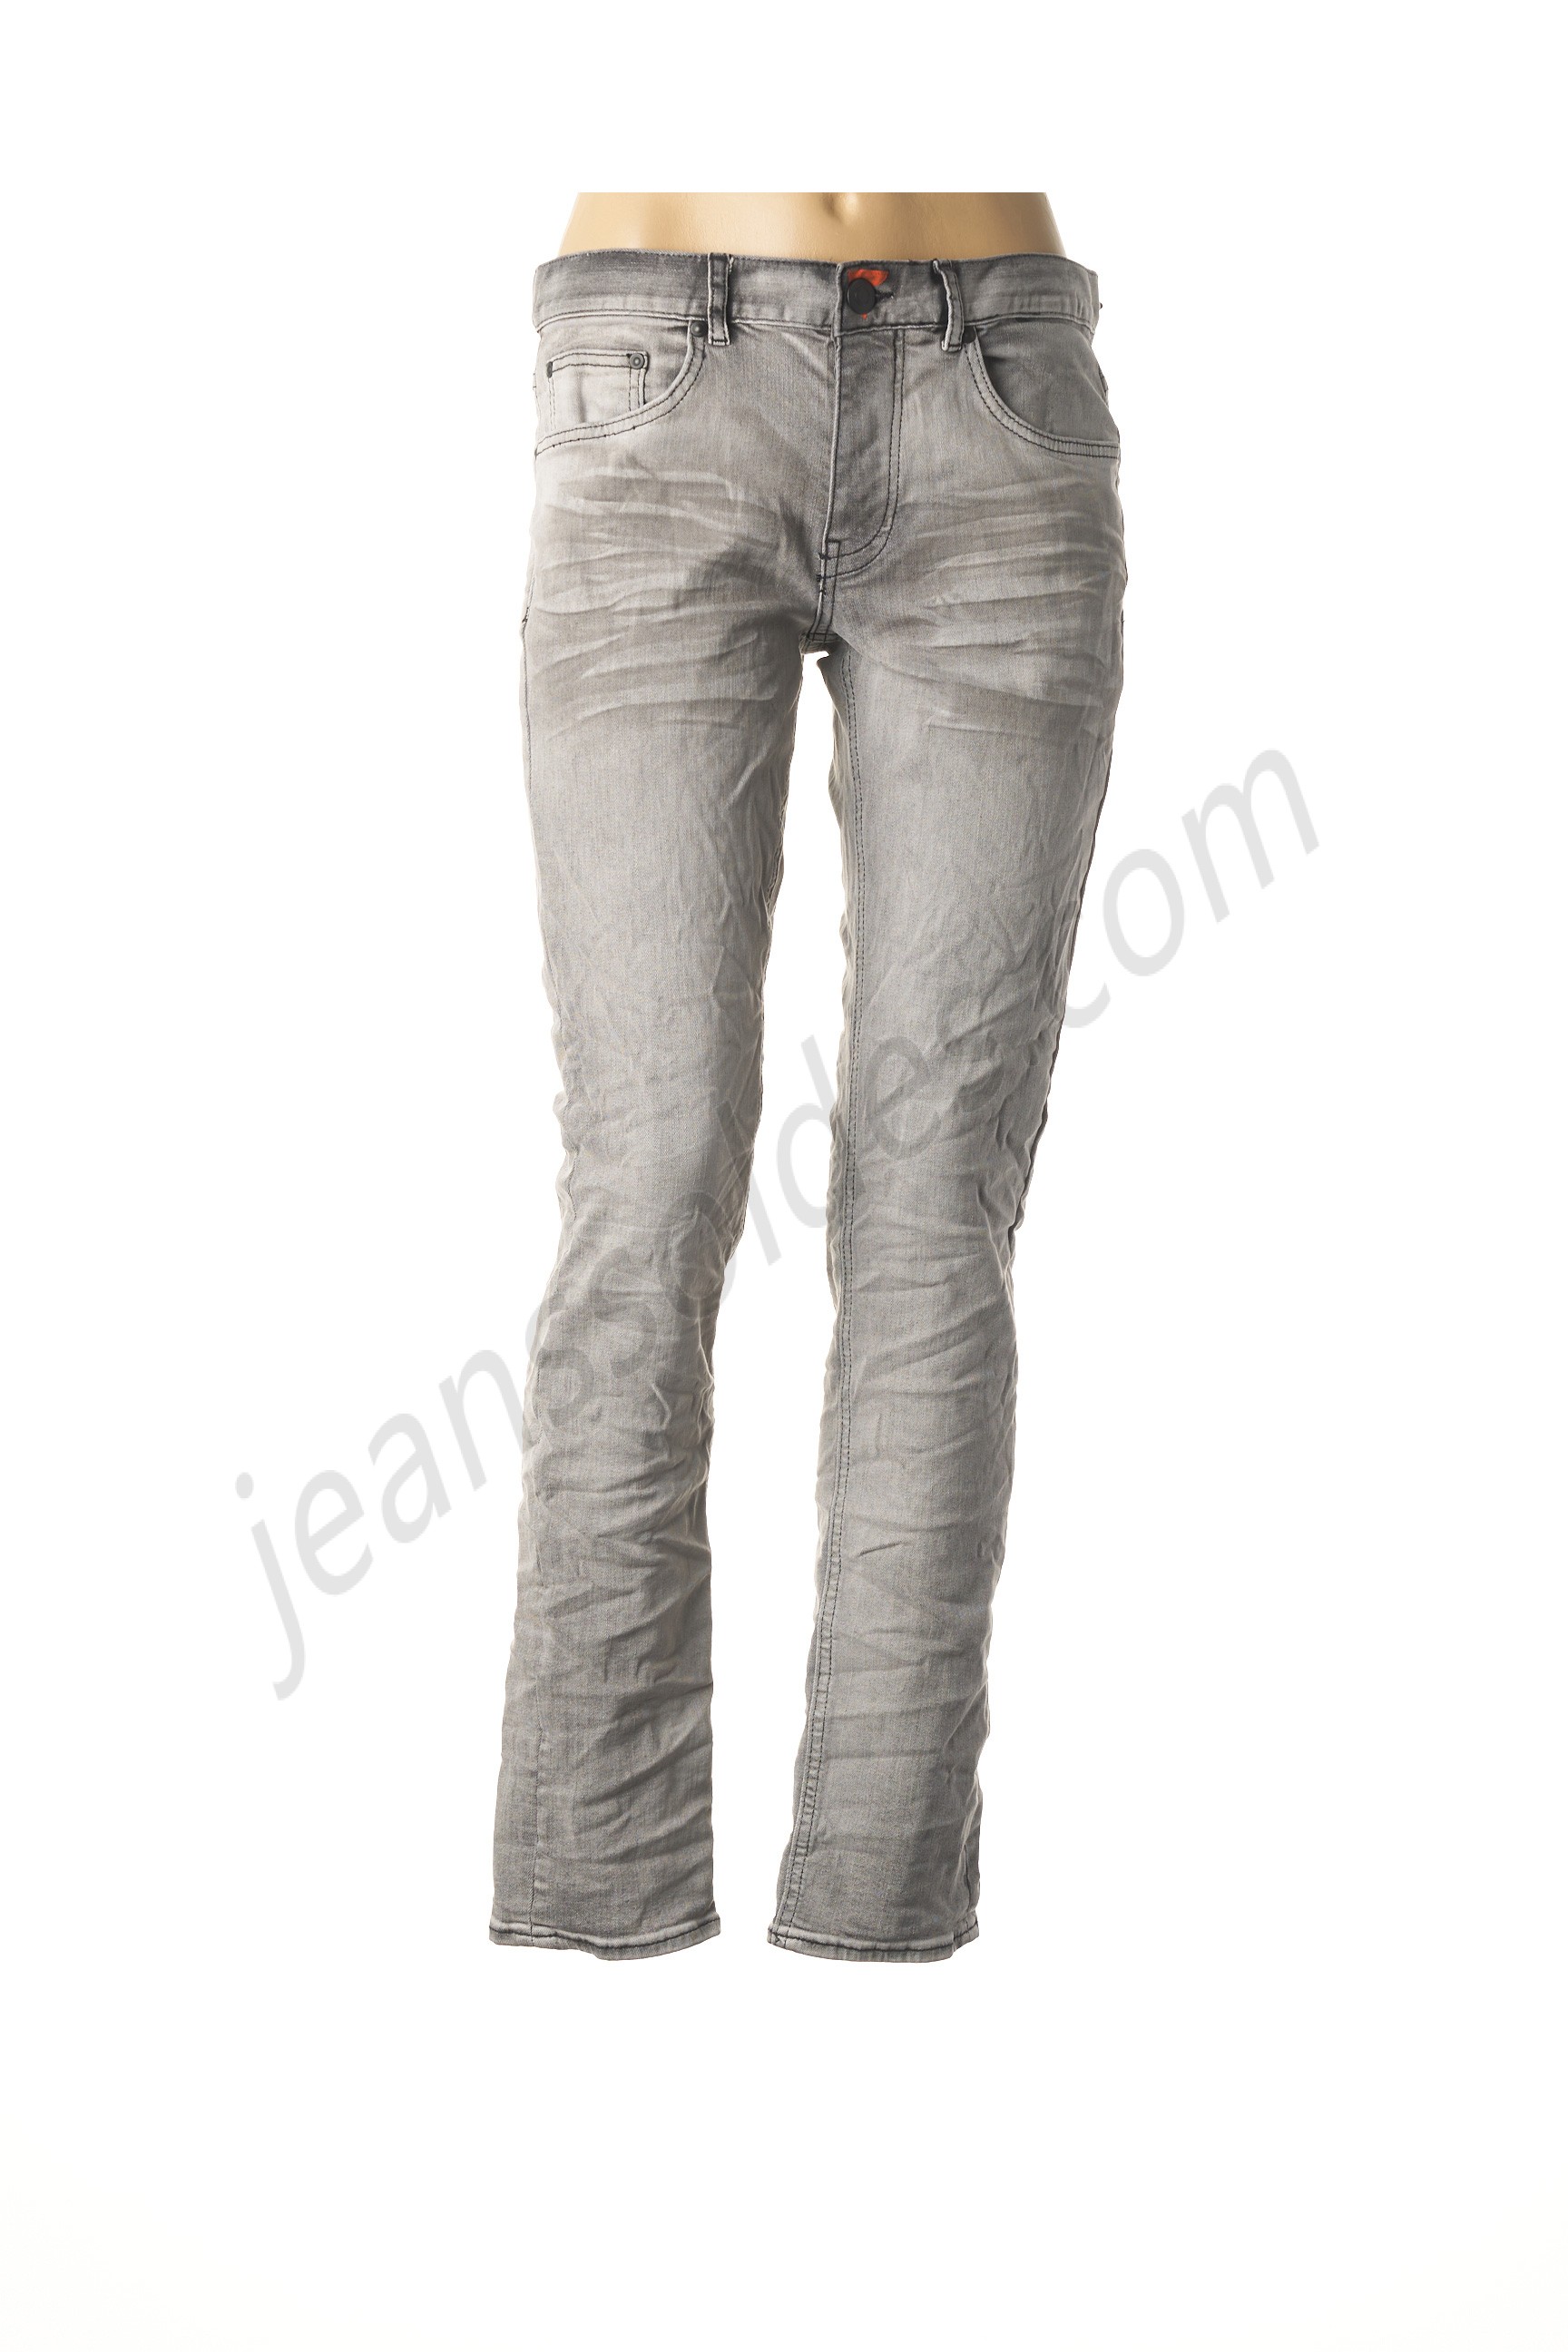 deepend-Jeans coupe slim prix d’amis - deepend-Jeans coupe slim prix d’amis